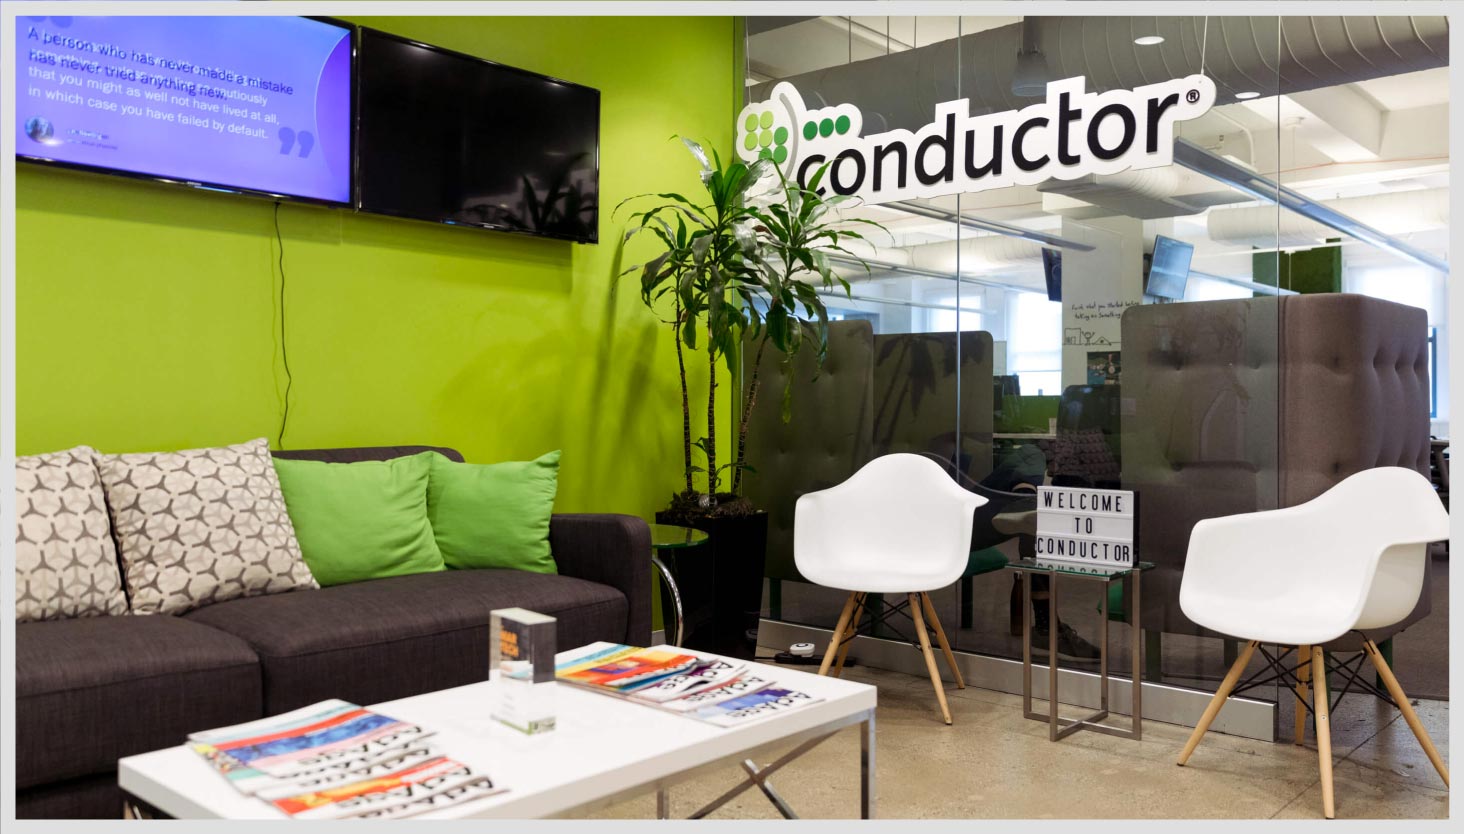 Image of Conductor office lobby